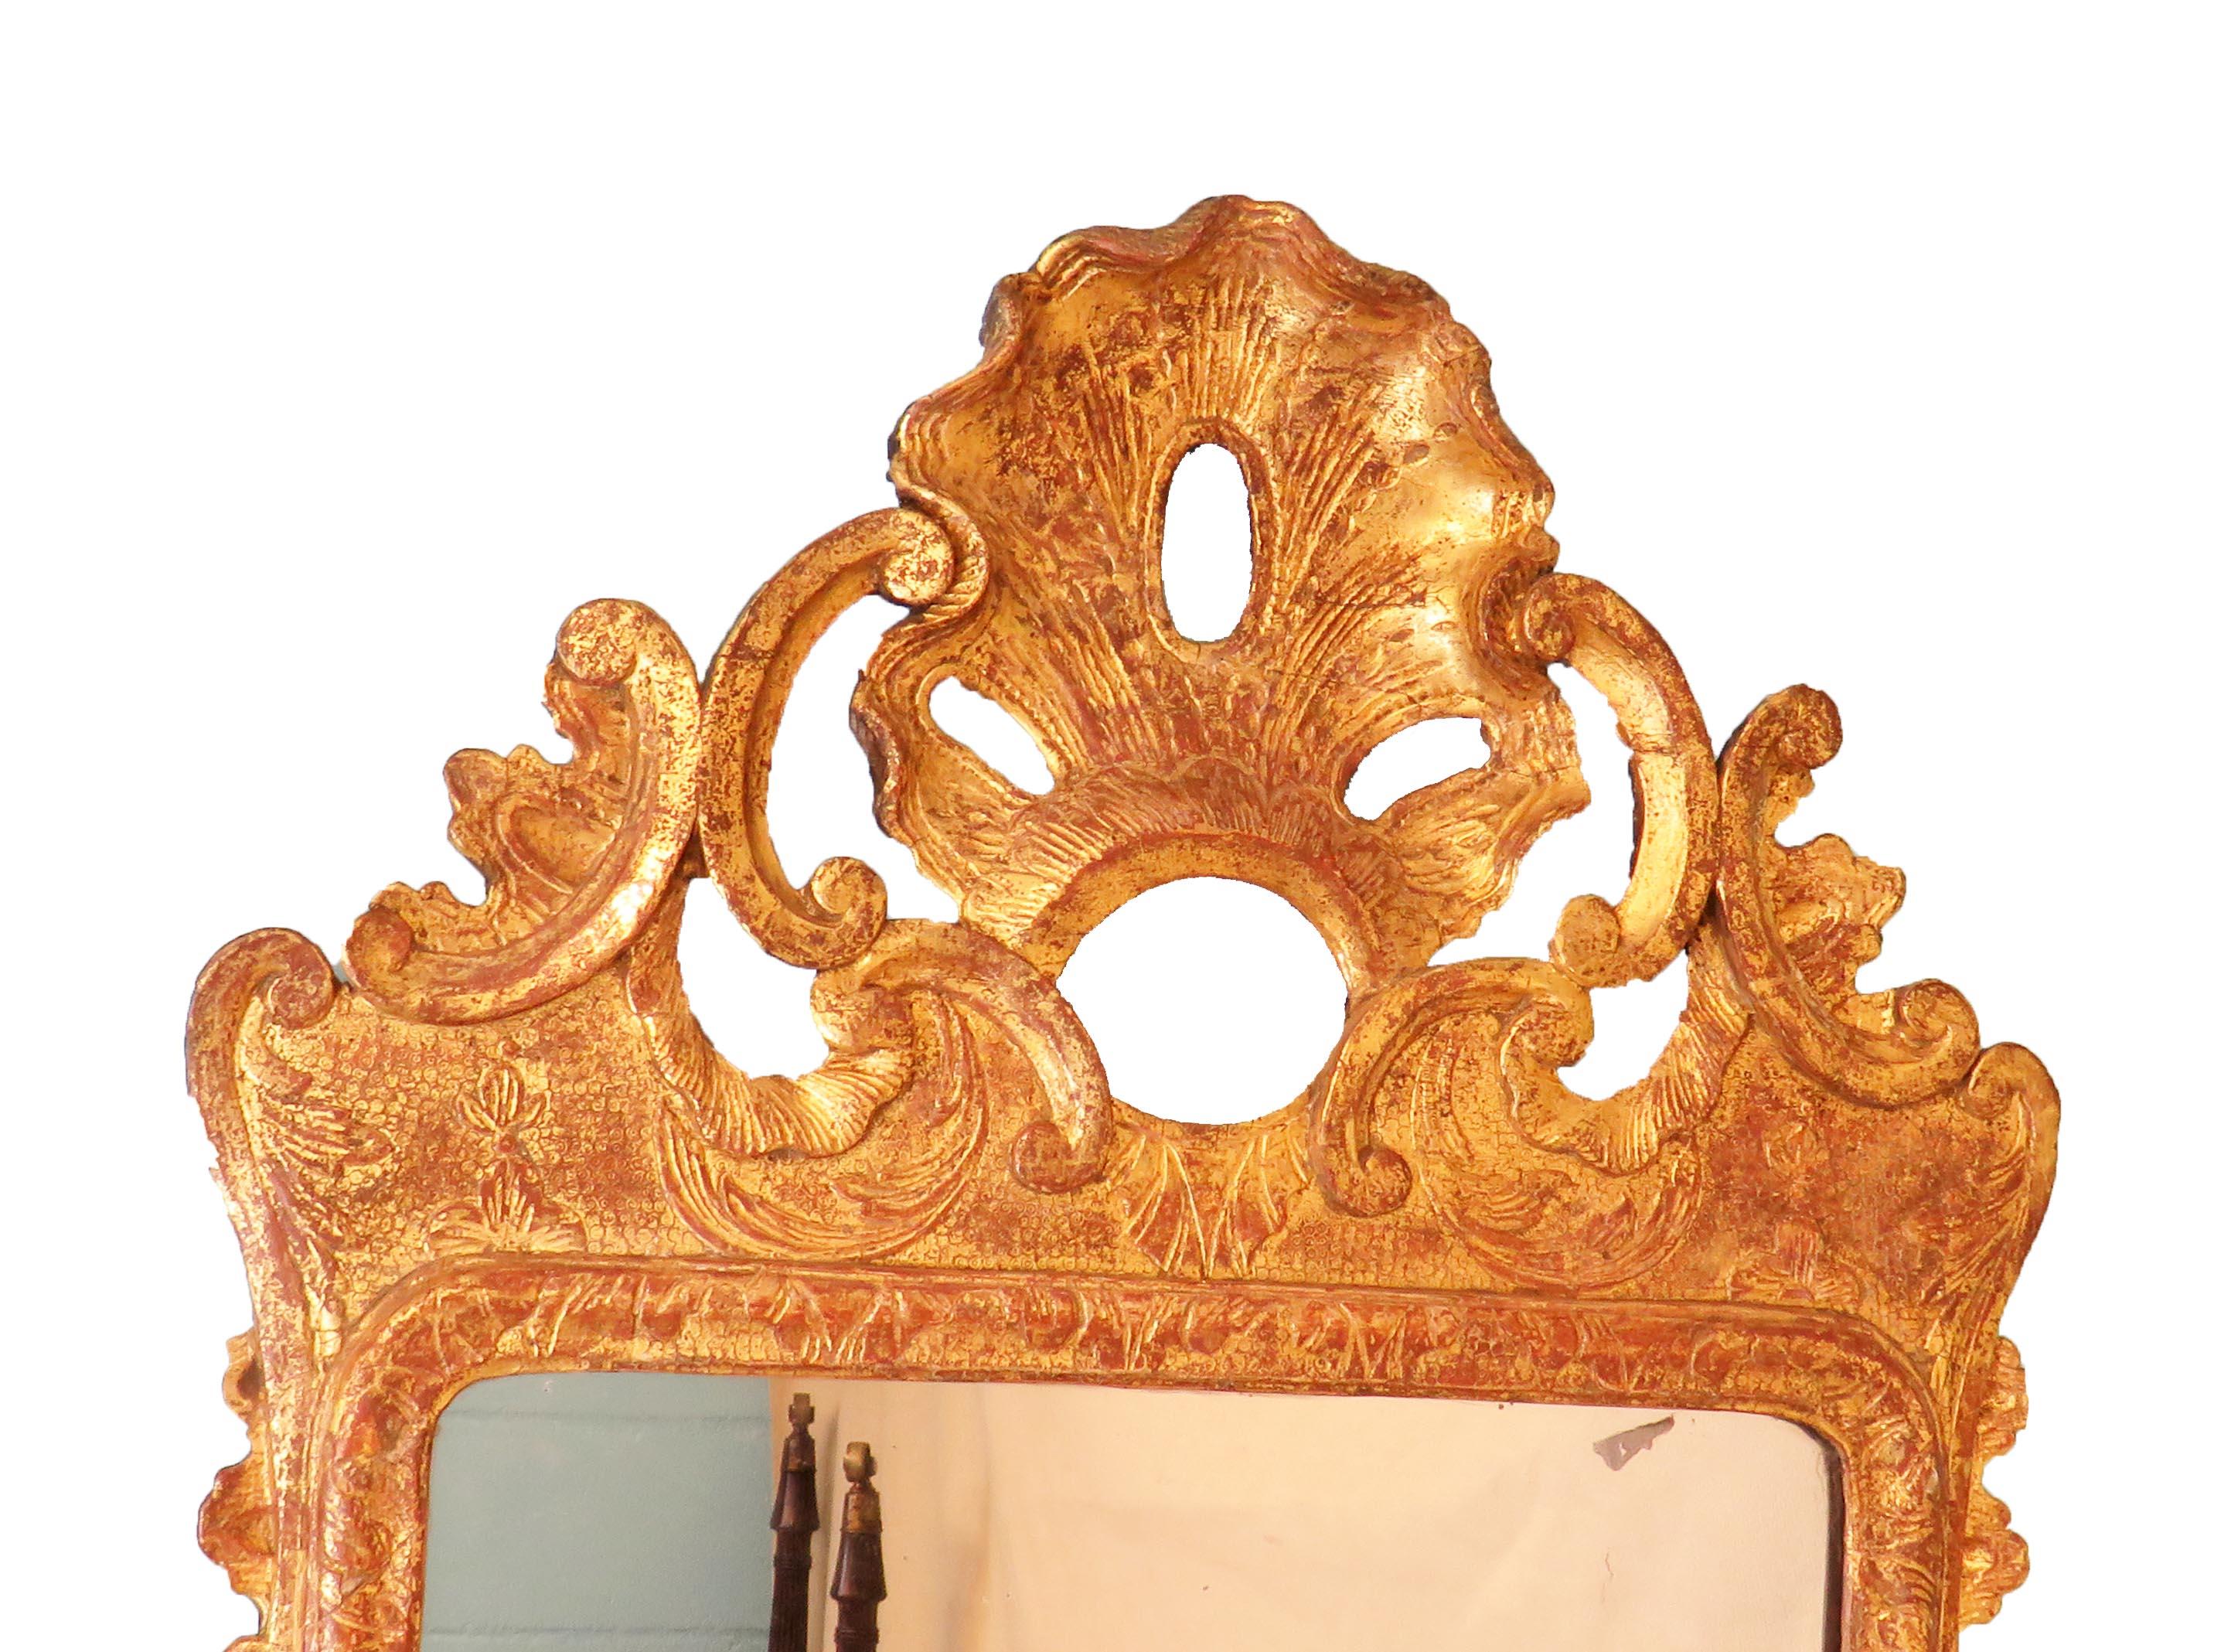 A Delightful 18th Century George II Period Giltwood 
And Gesso Wall Mirror Having Attractive Open Carved
Shell Flanked By C Scrolls Surmount Above Replacement 
Rectangular Mirror Plate Surrounded By Elegant Foliate 
Carved Strapwork Frame

( This